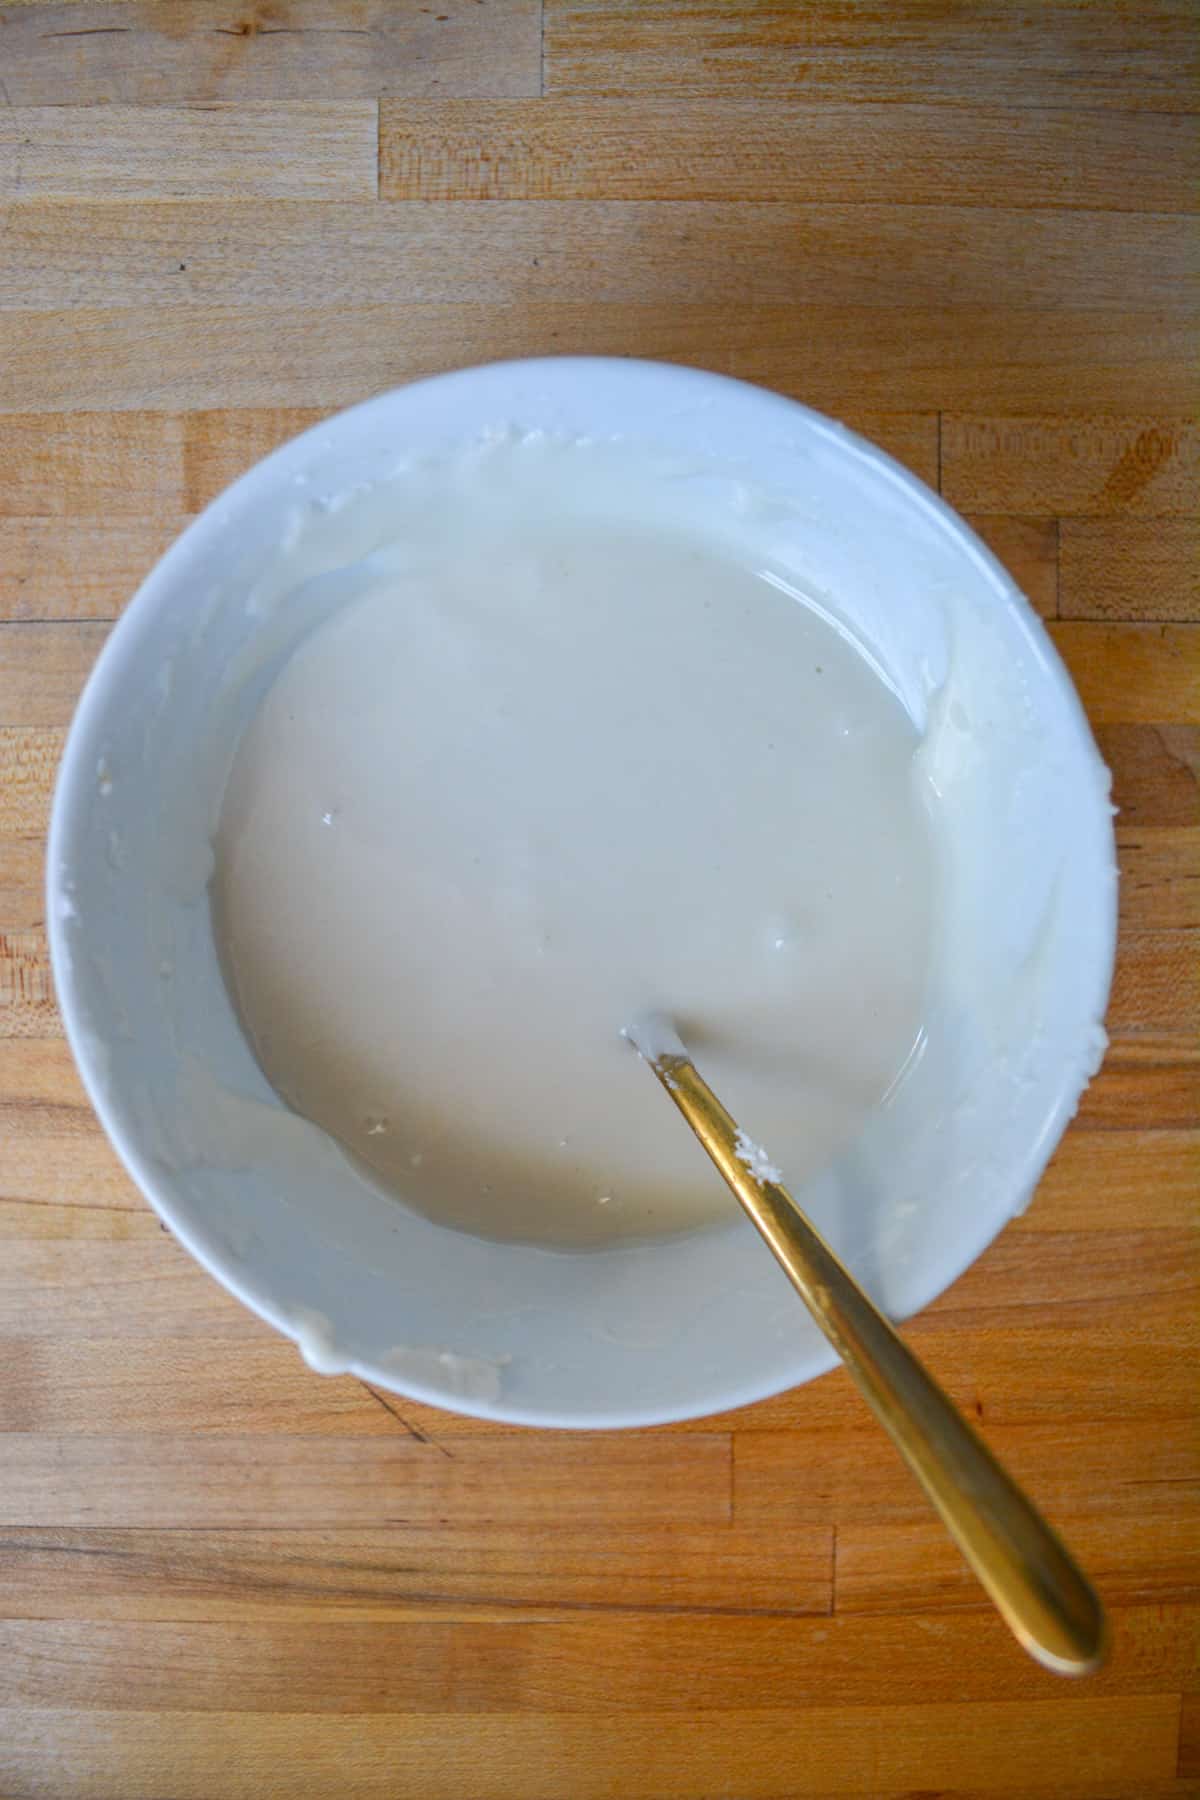 Vegan royal icing in a white bowl with a gold spoon.